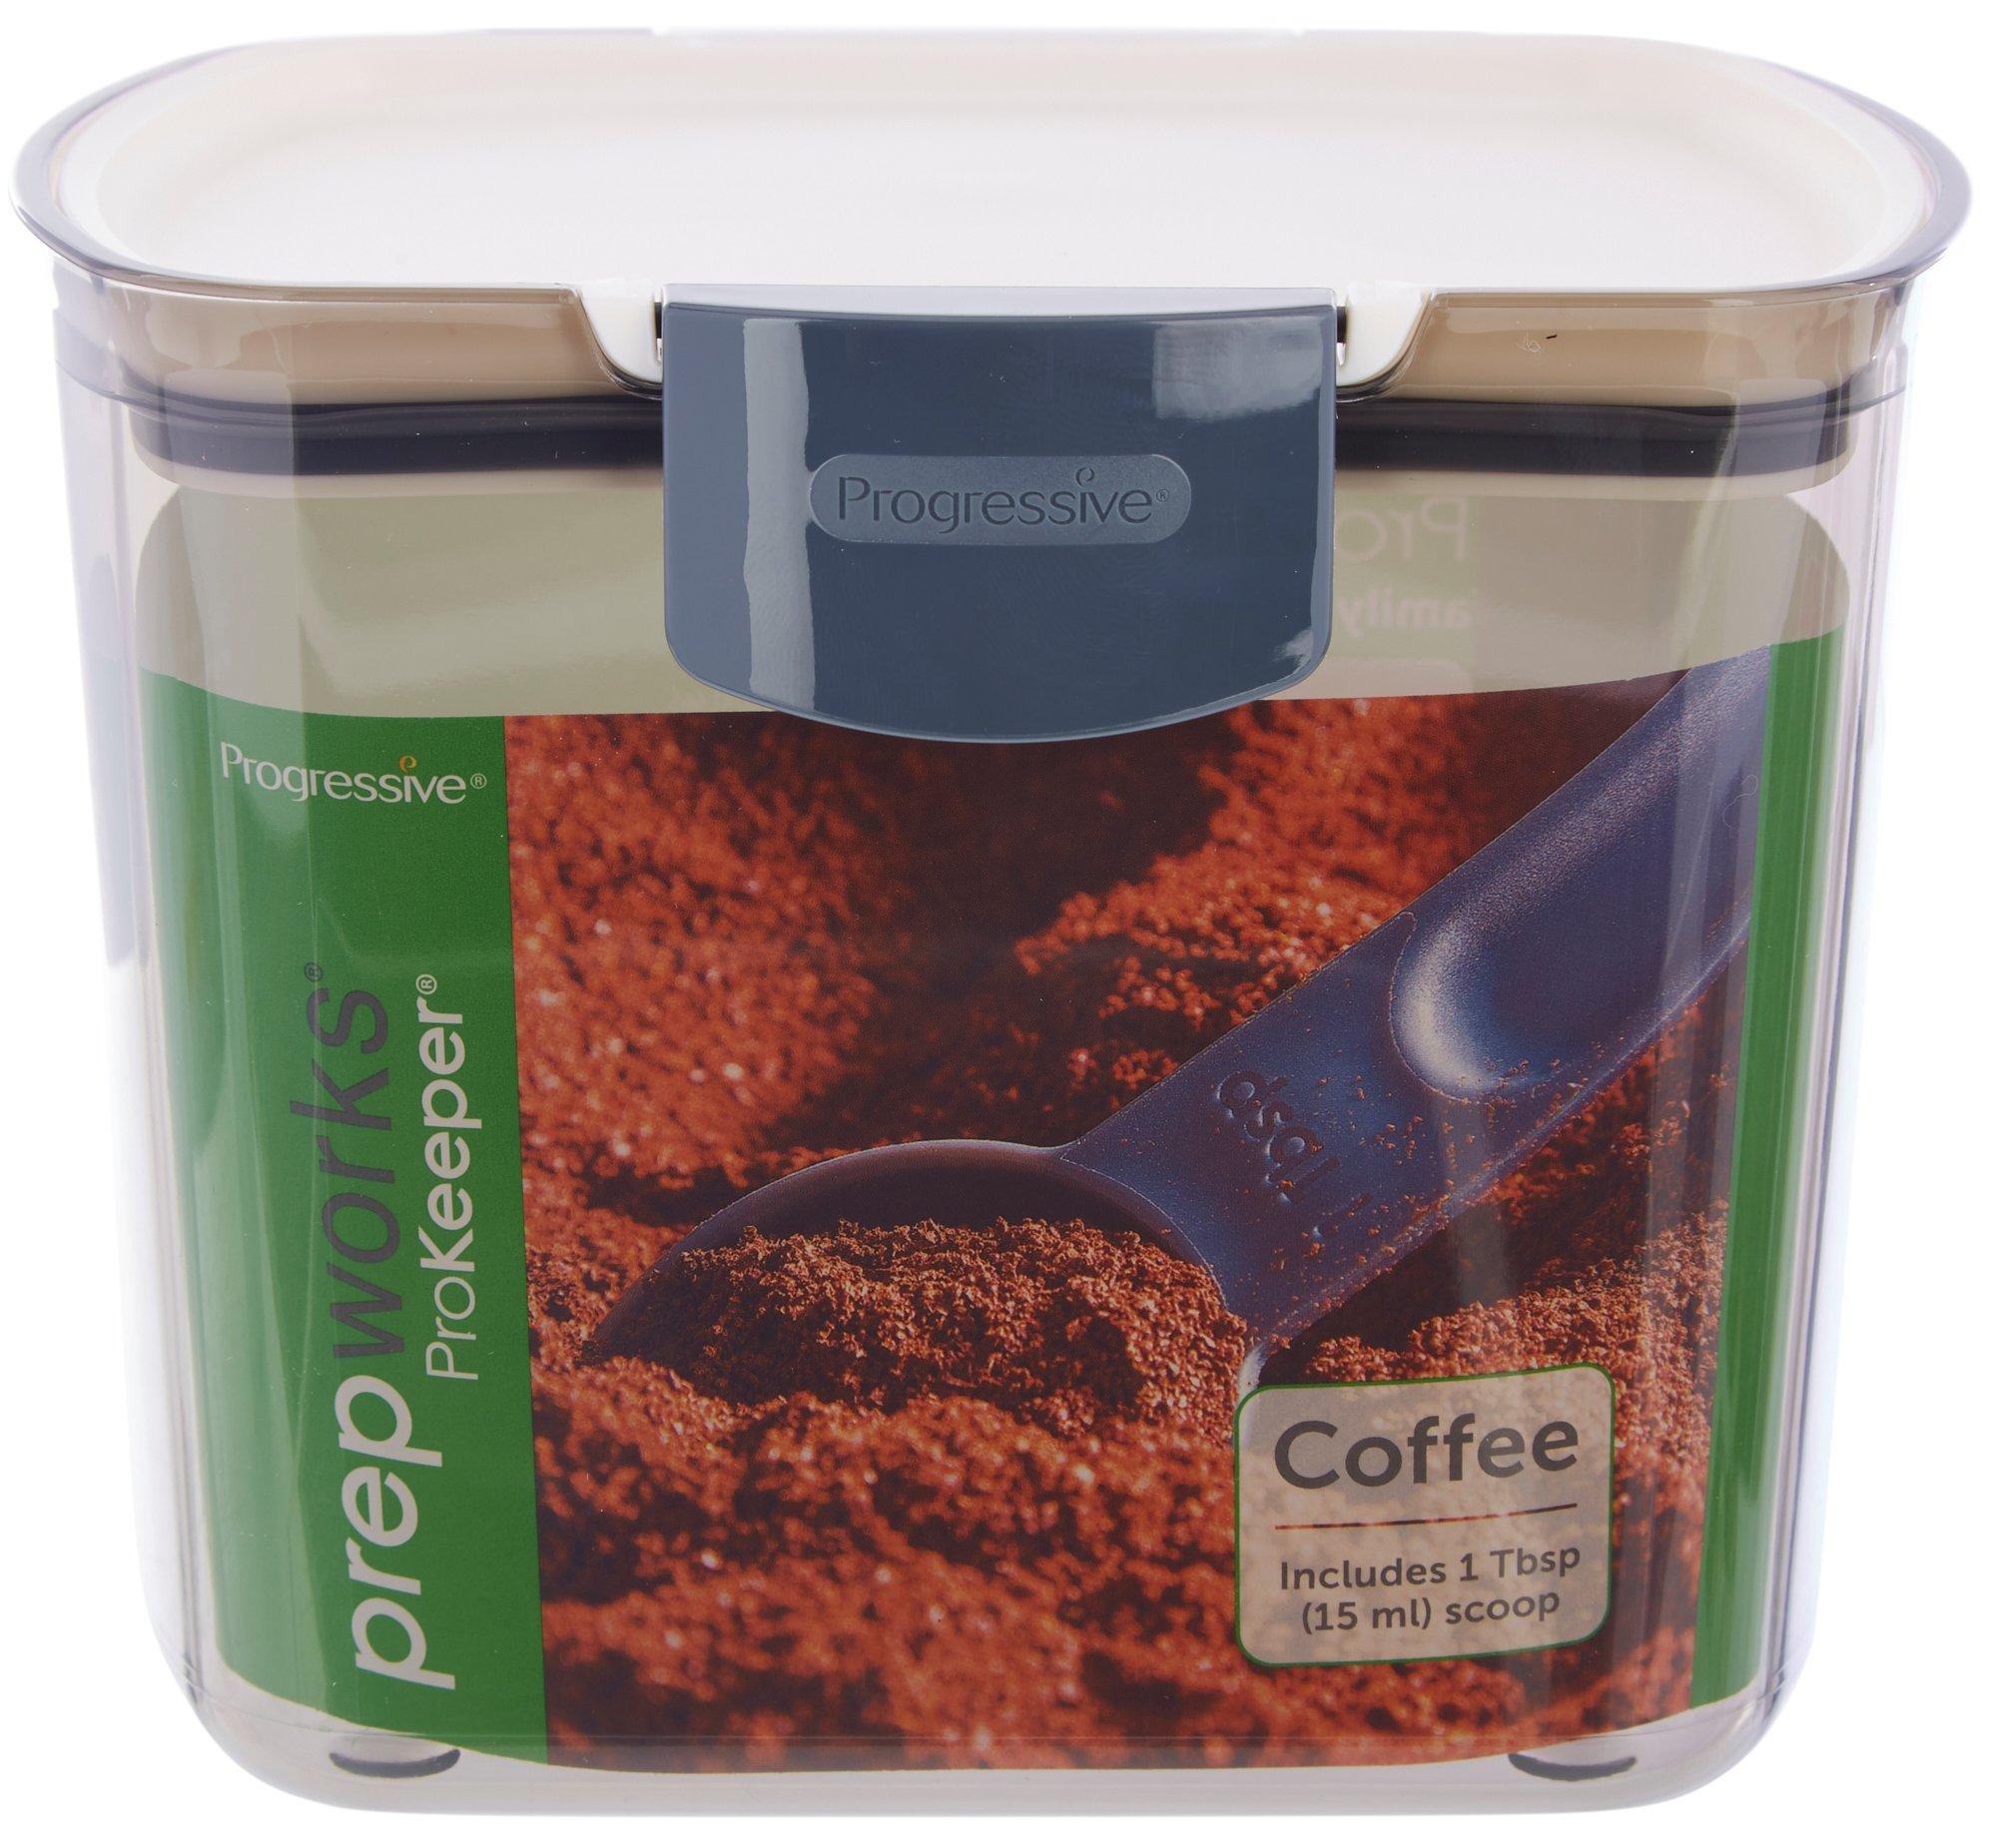 https://images.beallsflorida.com/i/beallsflorida/653-5444-0776-18-yyy/*Prepworks-ProKeeper-Coffee-And-Scooper-Storage-Container*?$product$&fmt=auto&qlt=default